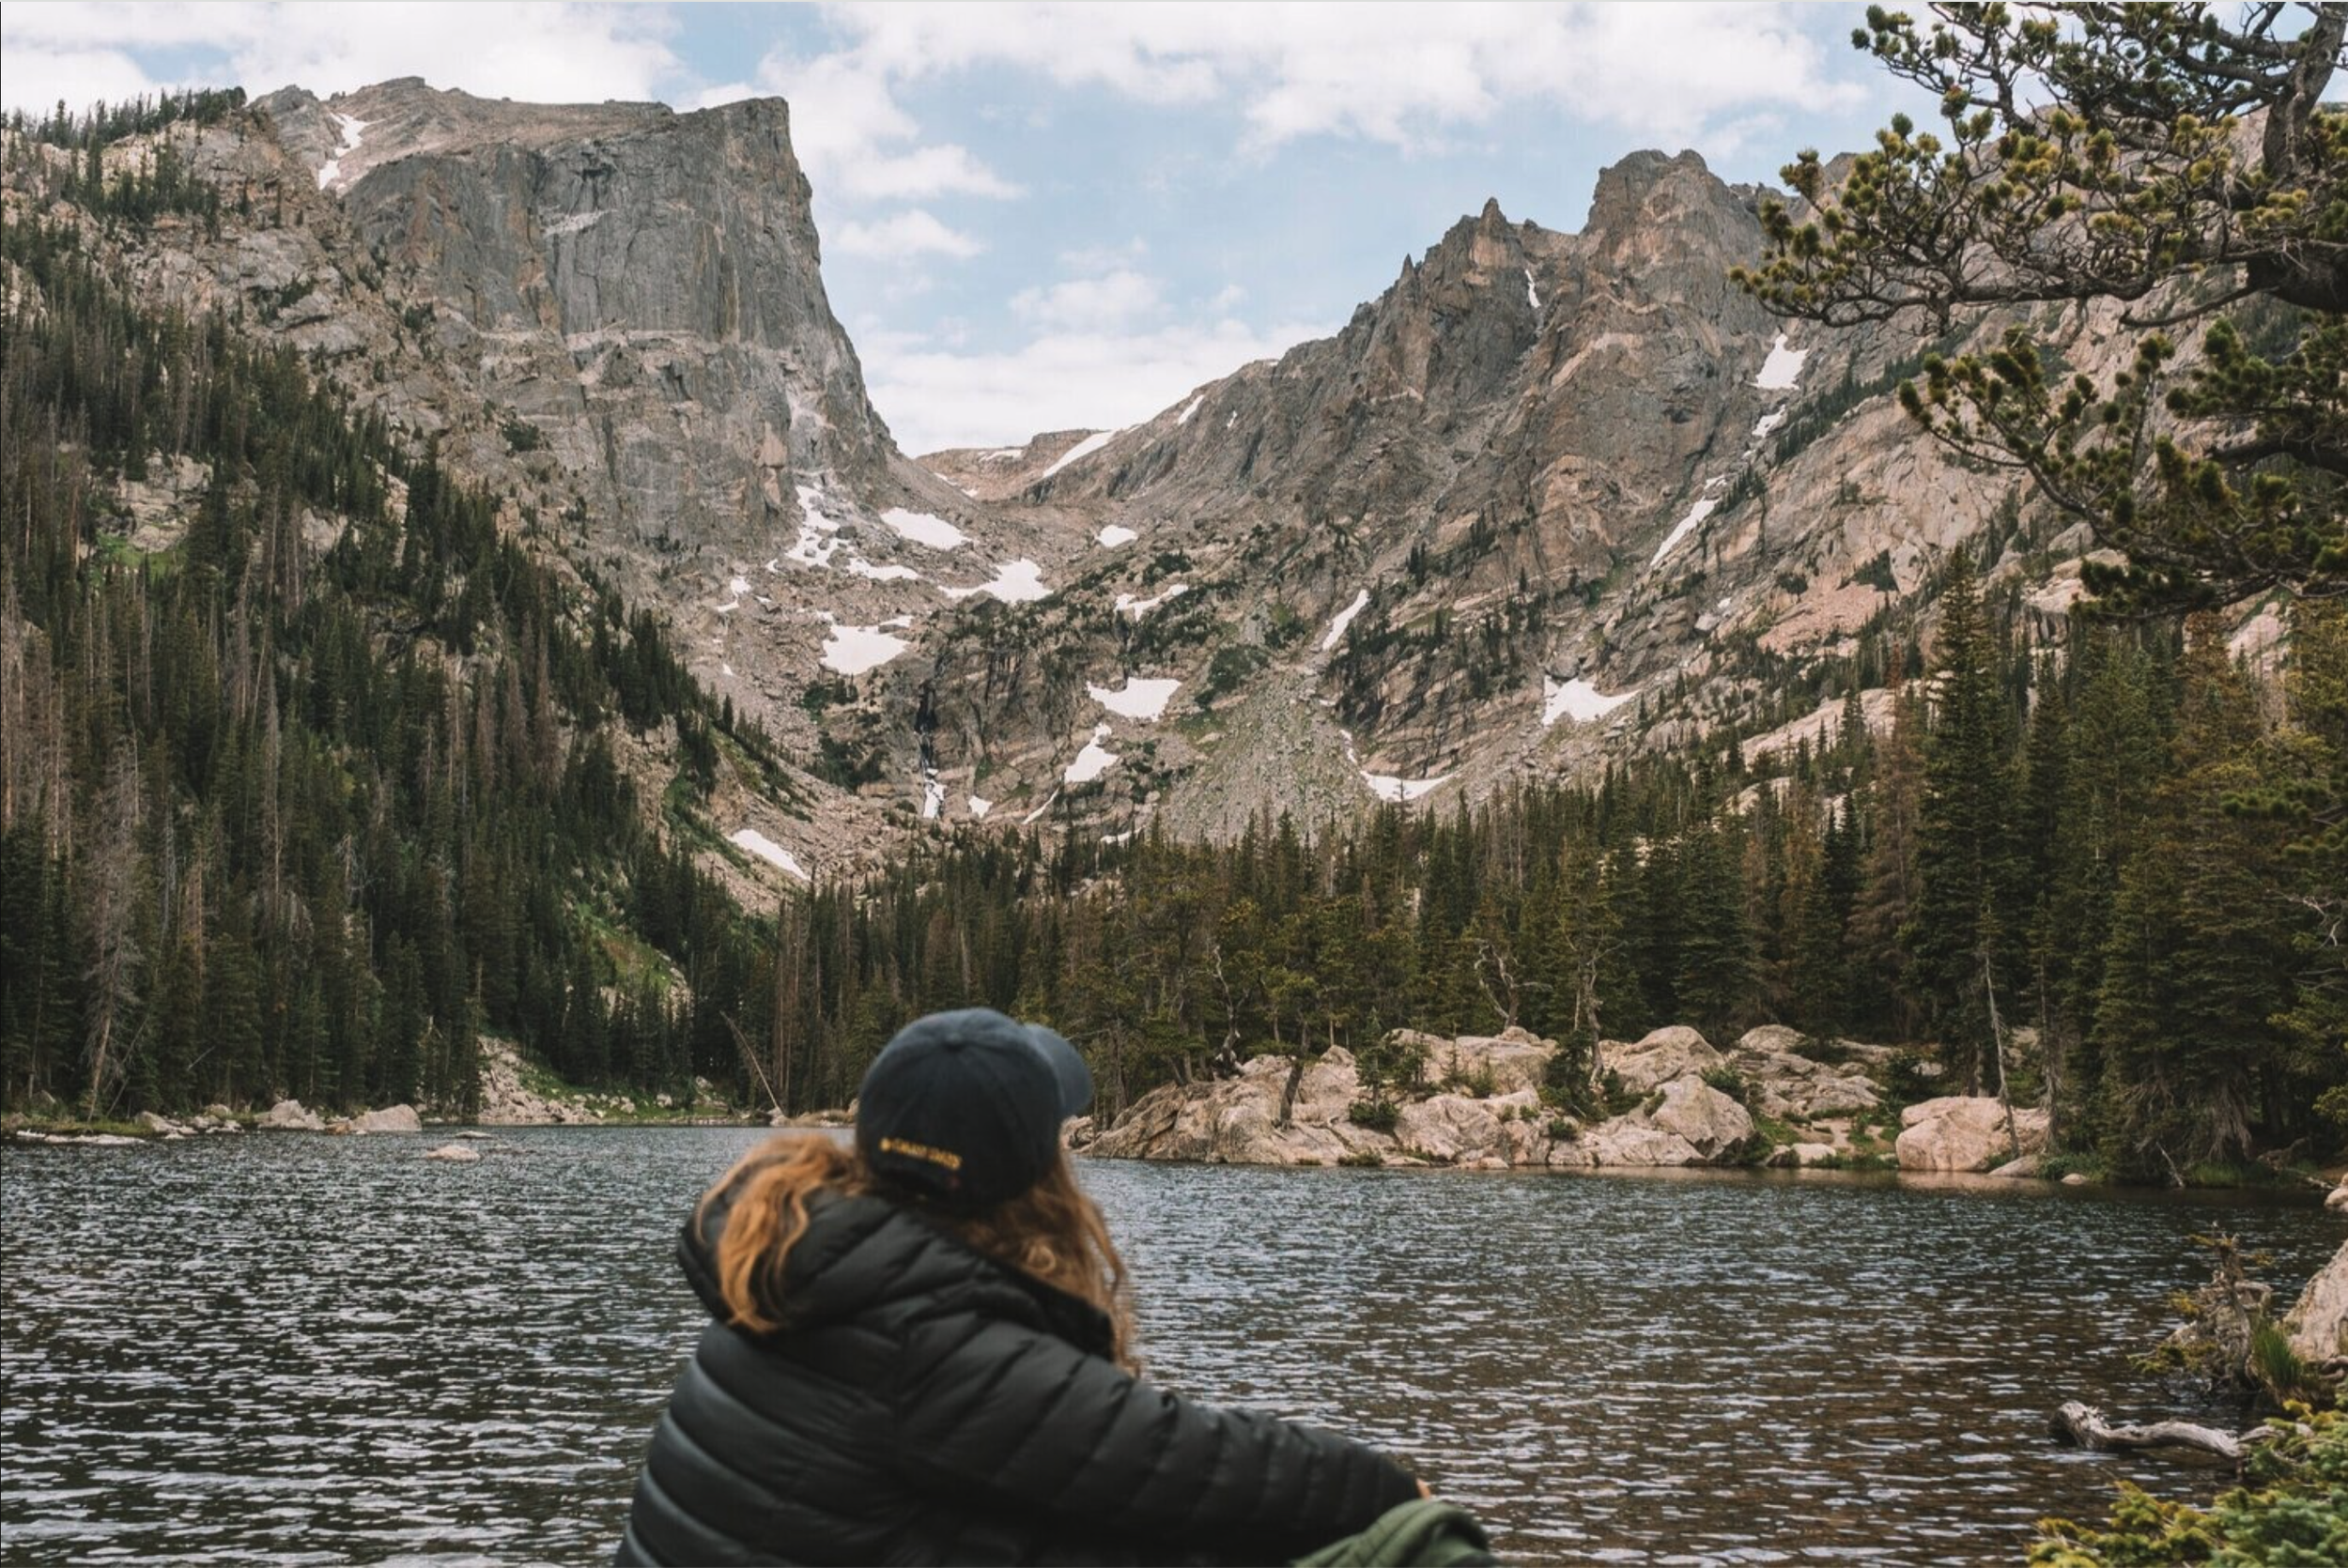 Colleen Goldhorn – How To Spend 48 Hours In Rocky Mountain National Park